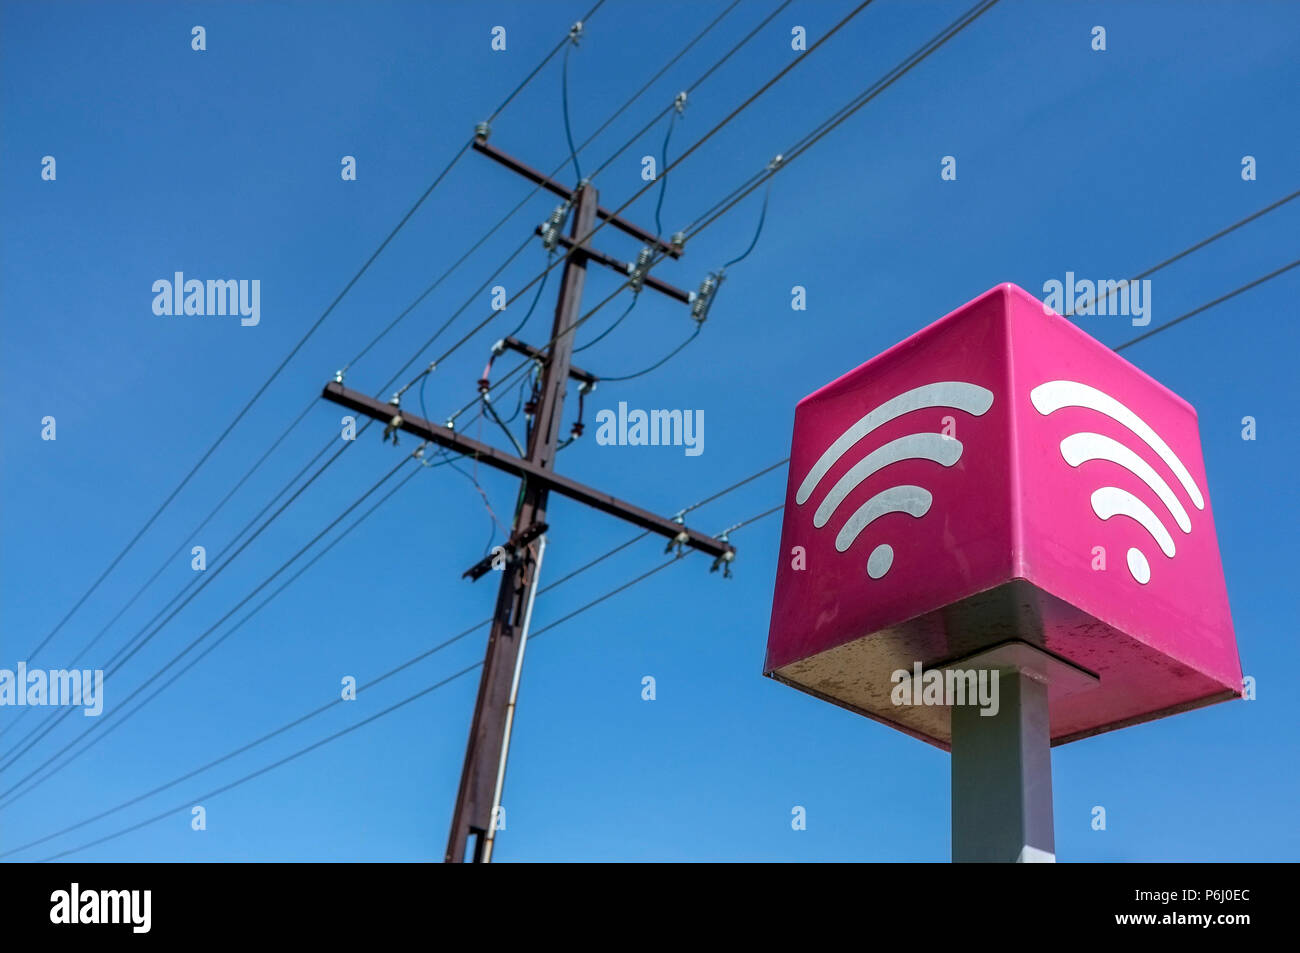 Telephone lines and Wi Fi sign against a blue sky. Stock Photo